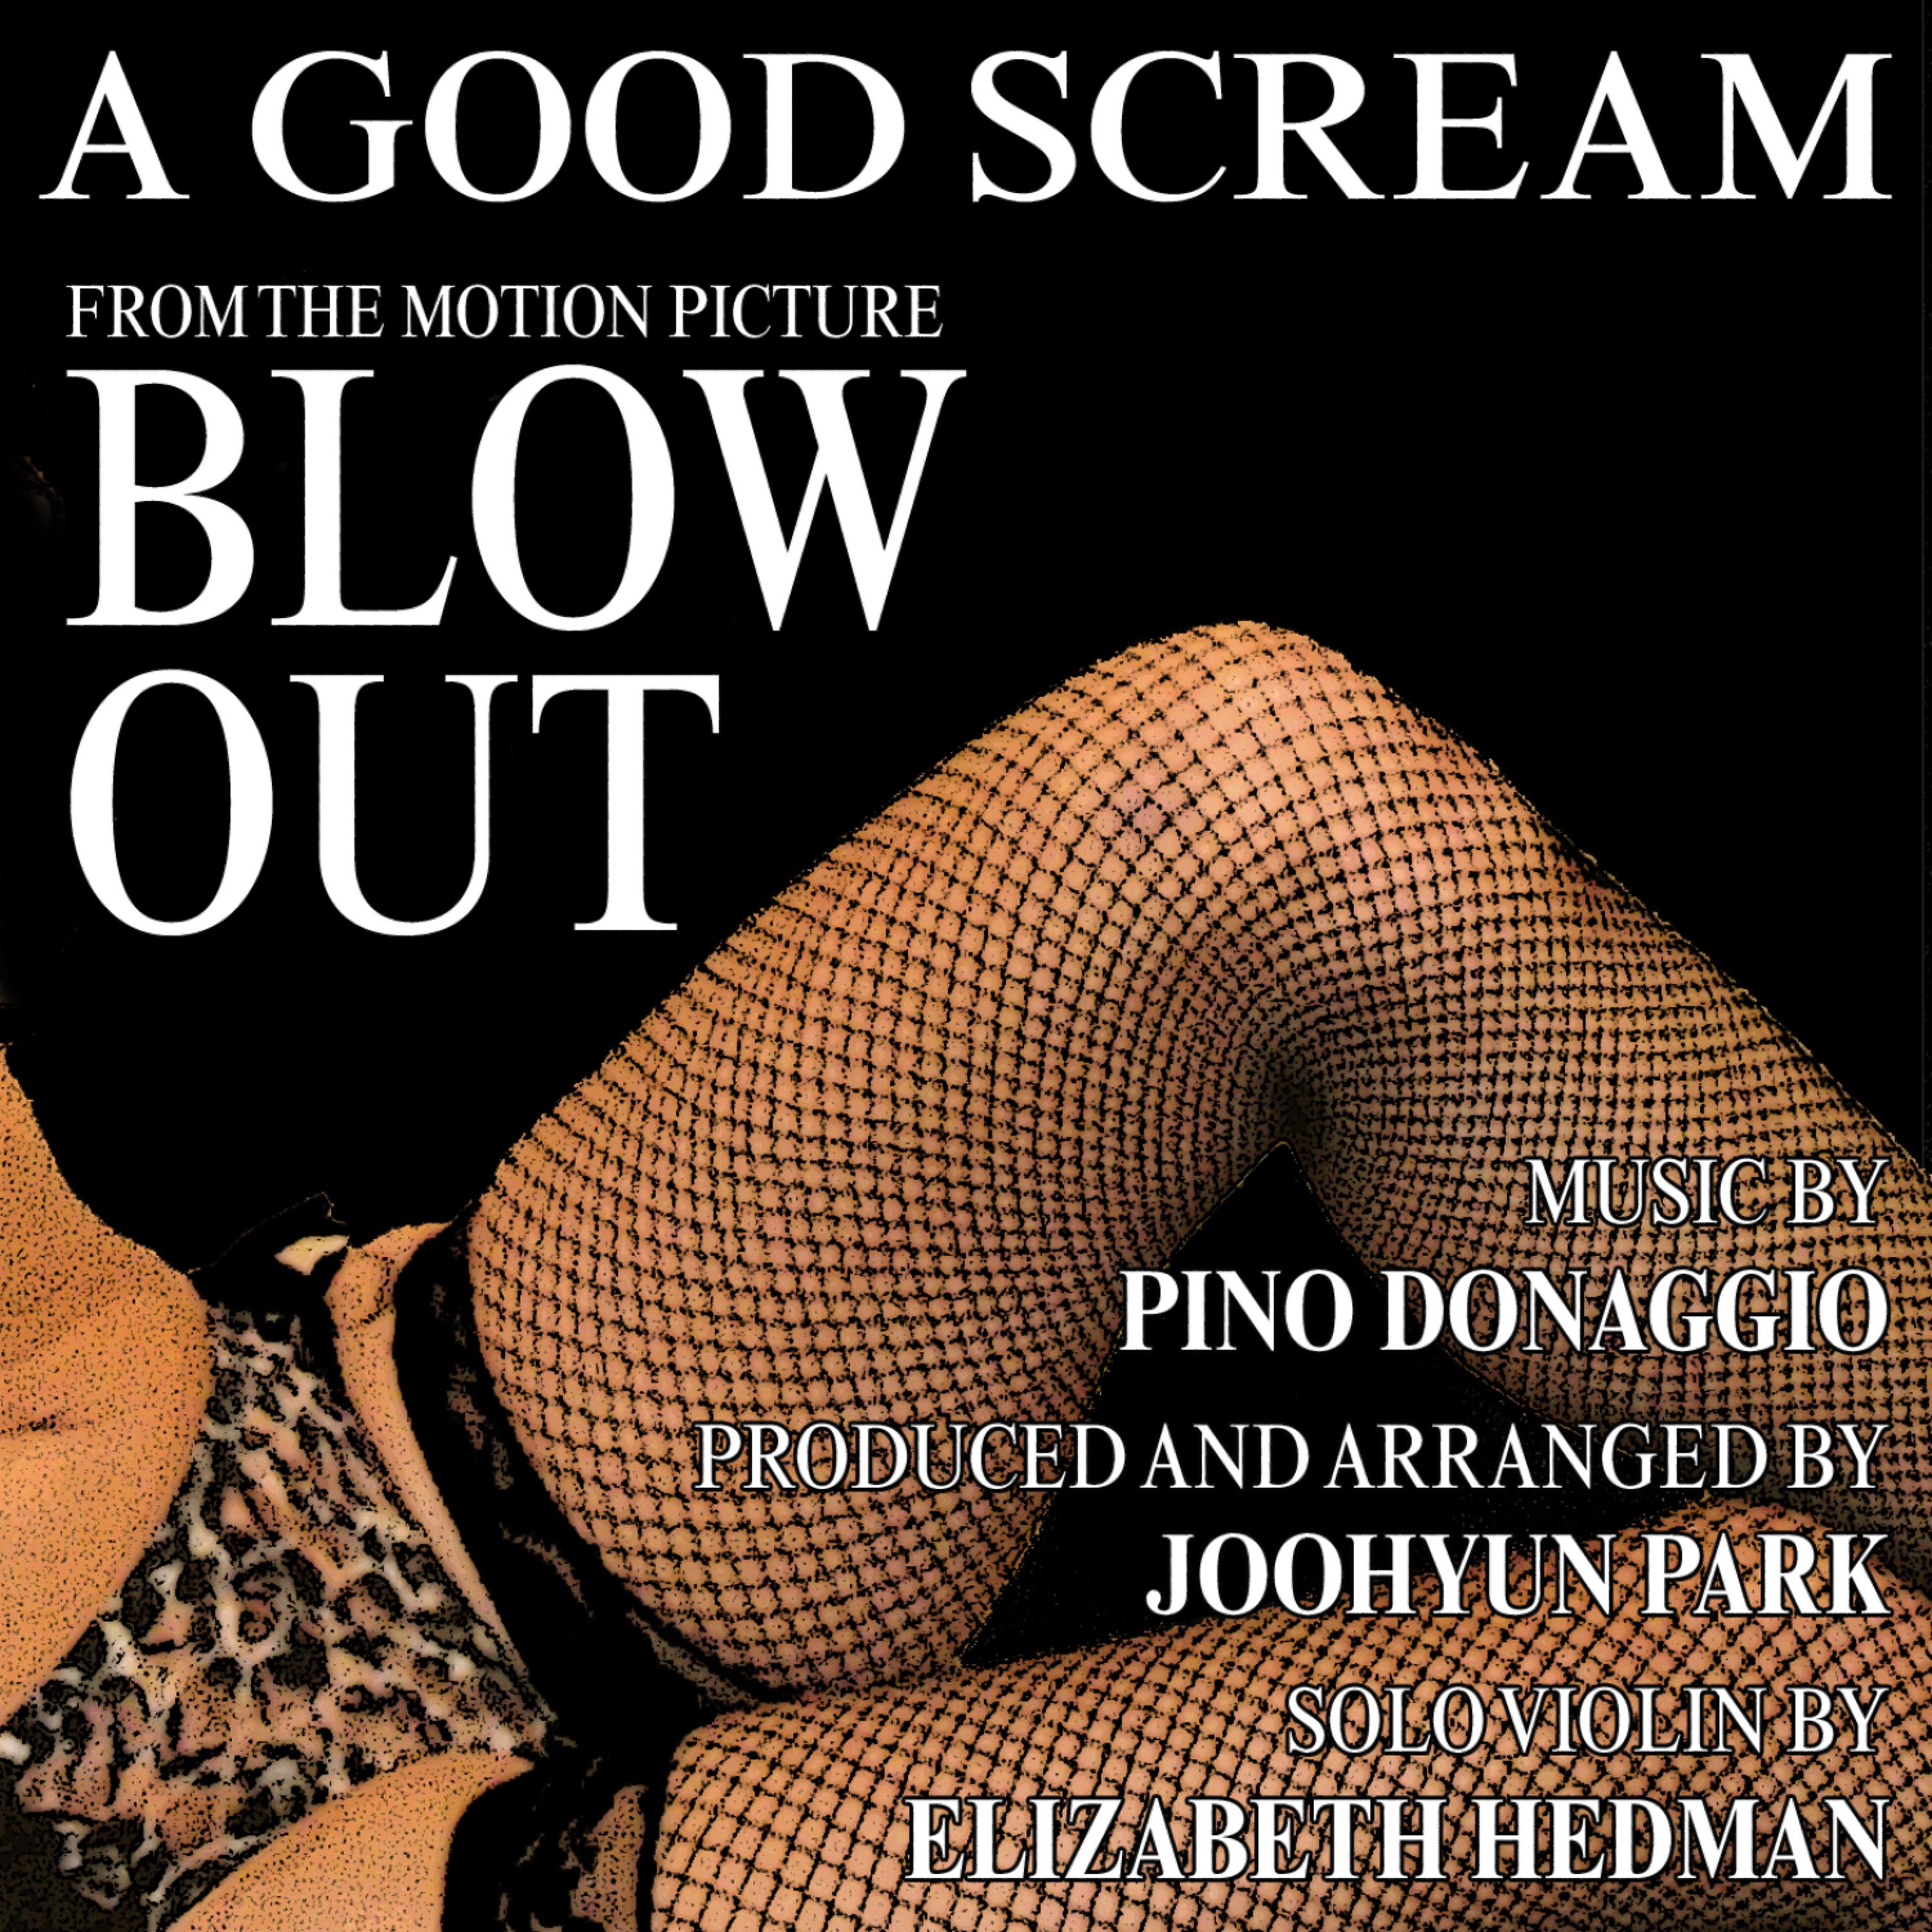 Постер альбома Blow Out - "A Good Scream" For Piano and Violin composed by Pino Donaggio